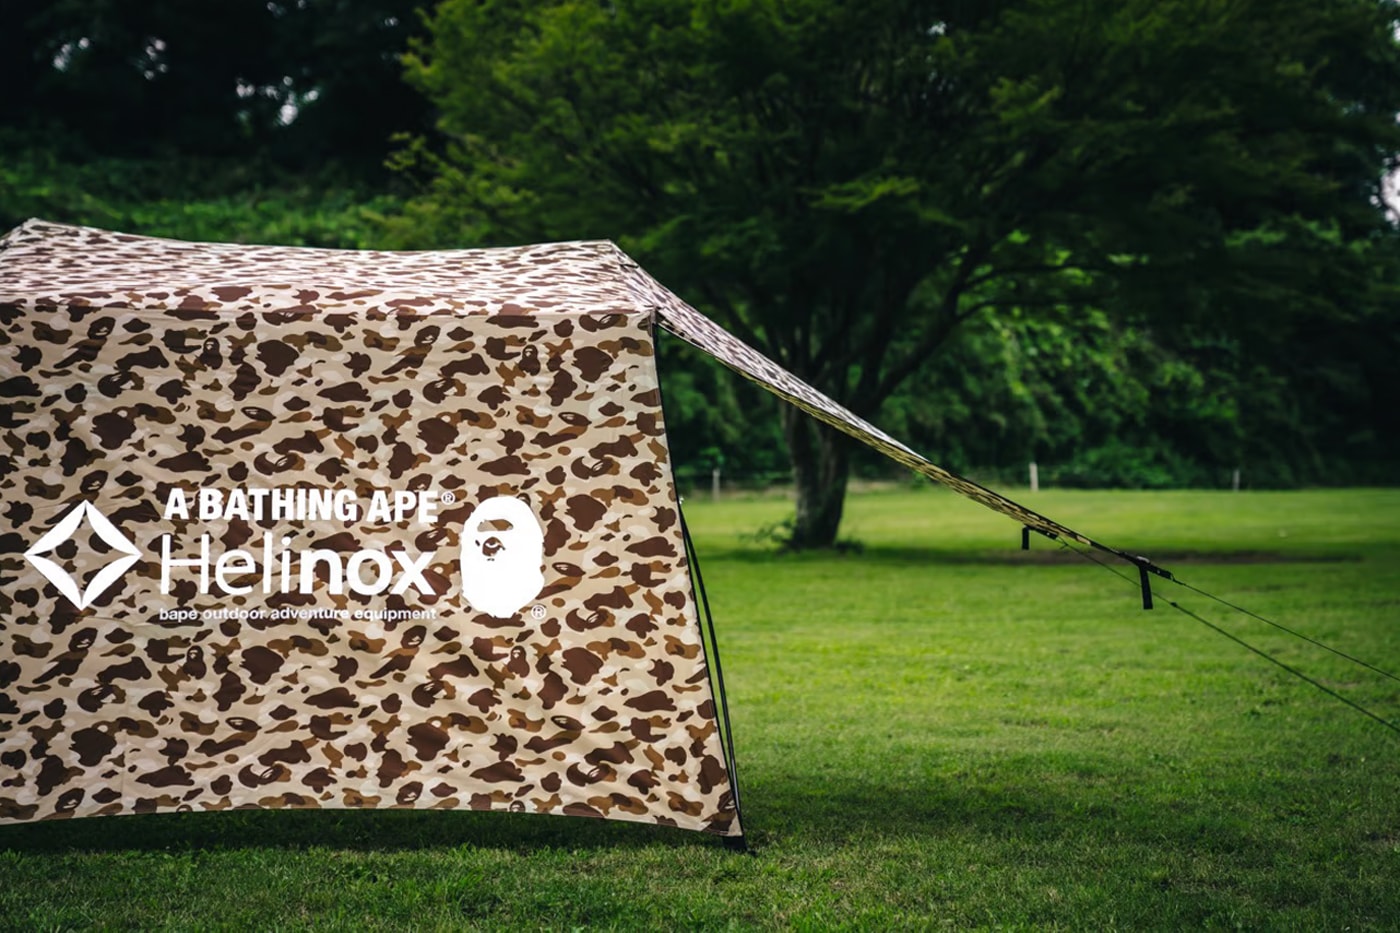 BAPE Goes Camping A Bathing Ape Unveils A Camping Ape outdoor equipment gear kitchenware stackable cups foldable lantern case tent tarp polyester cooler helinox pendleton jaguy japanese popup exhibition collection practical durable versatile